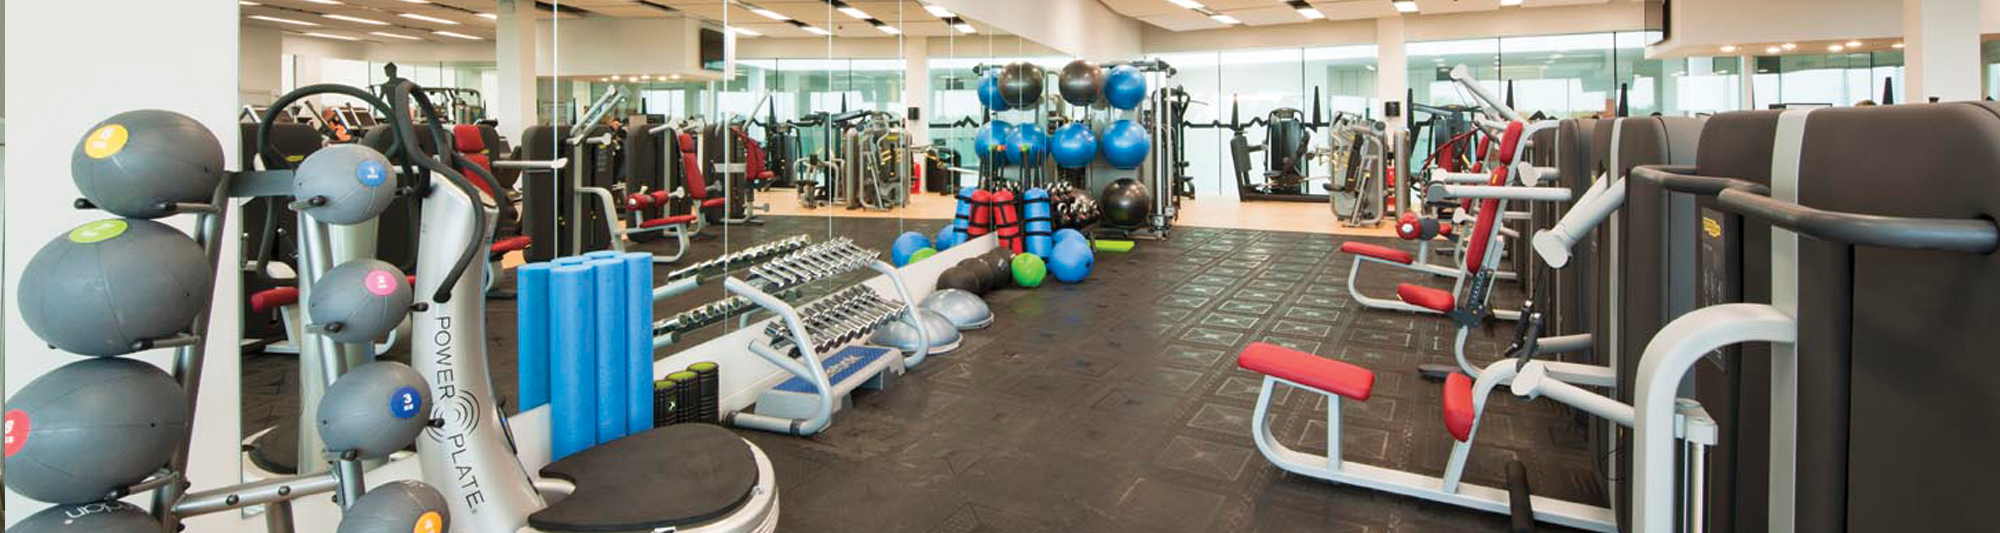 Michael Woods Sports And Leisure Centre | Viewfield, Glenrothes KY6 2RD | +44 1592 583305